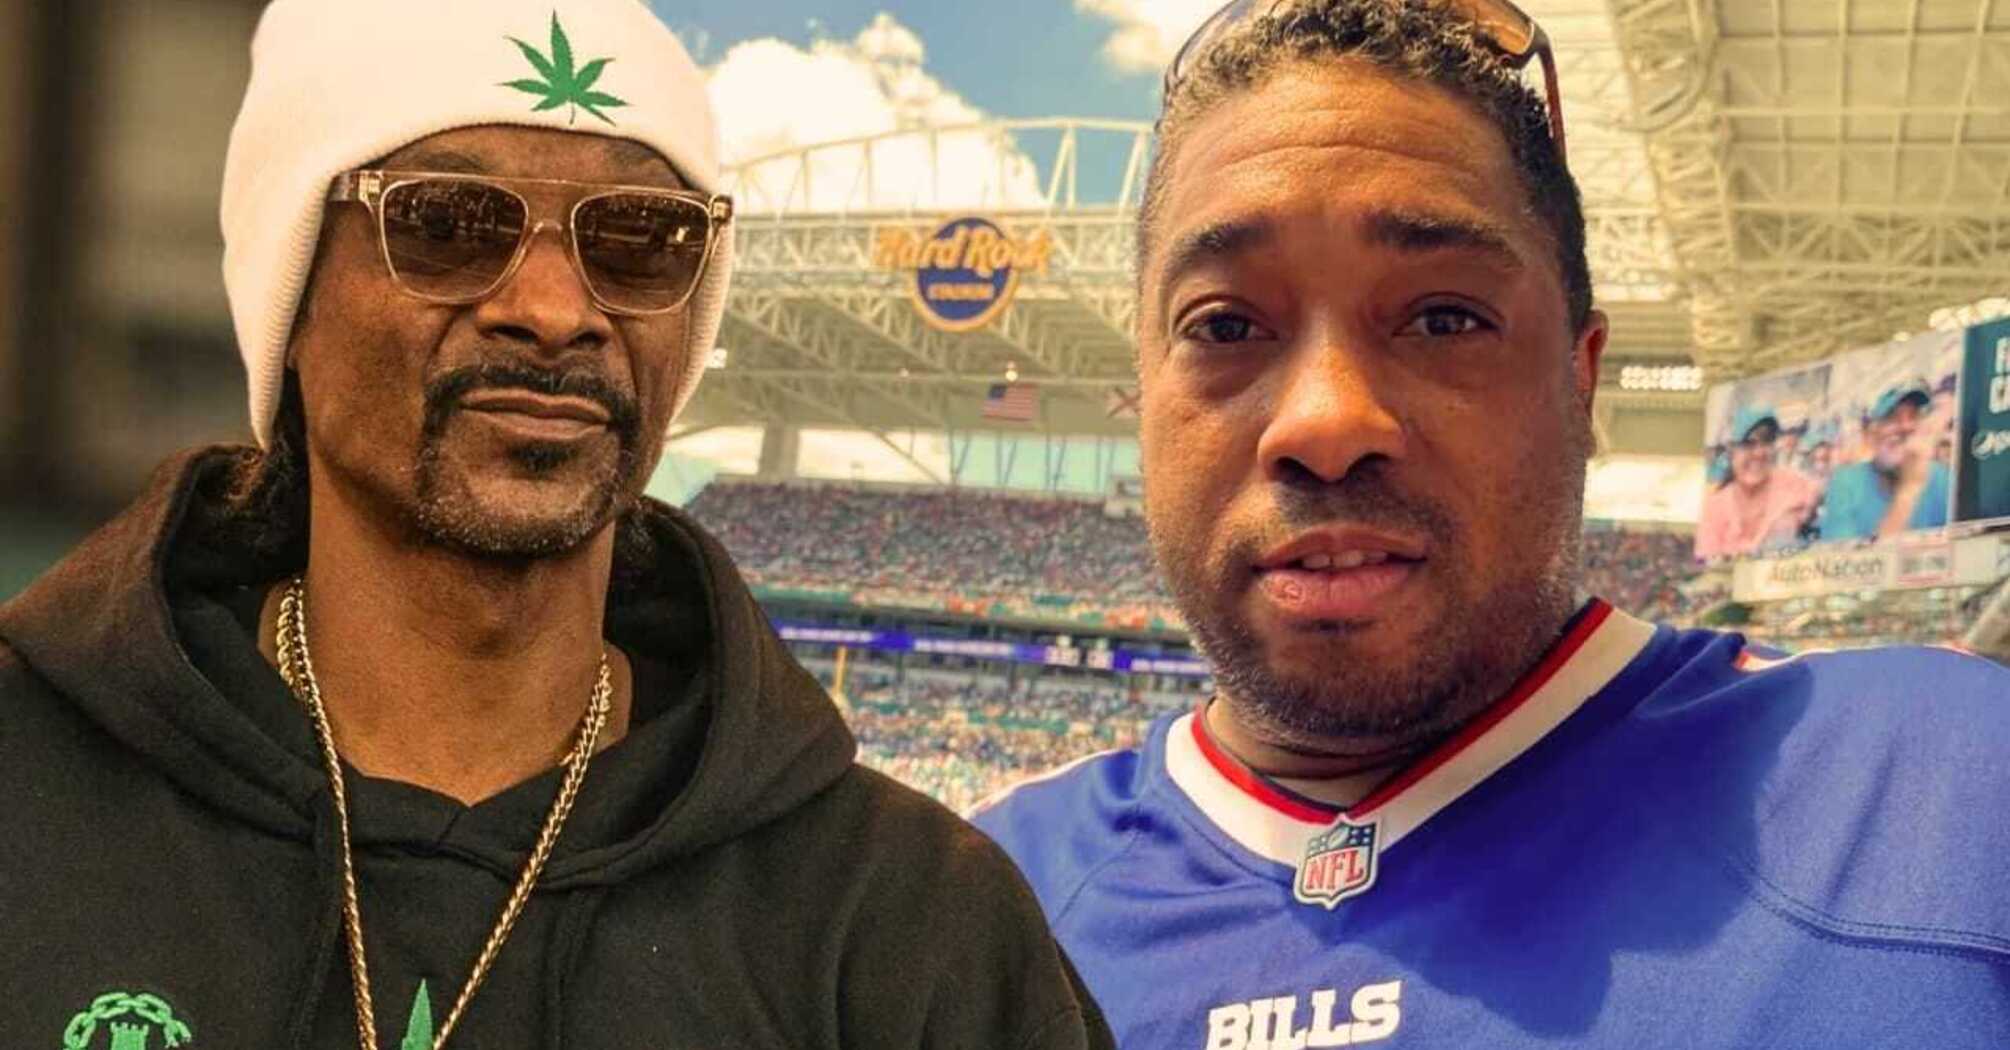 Rapper Snoop Dogg announced the death of his 45-year-old brother